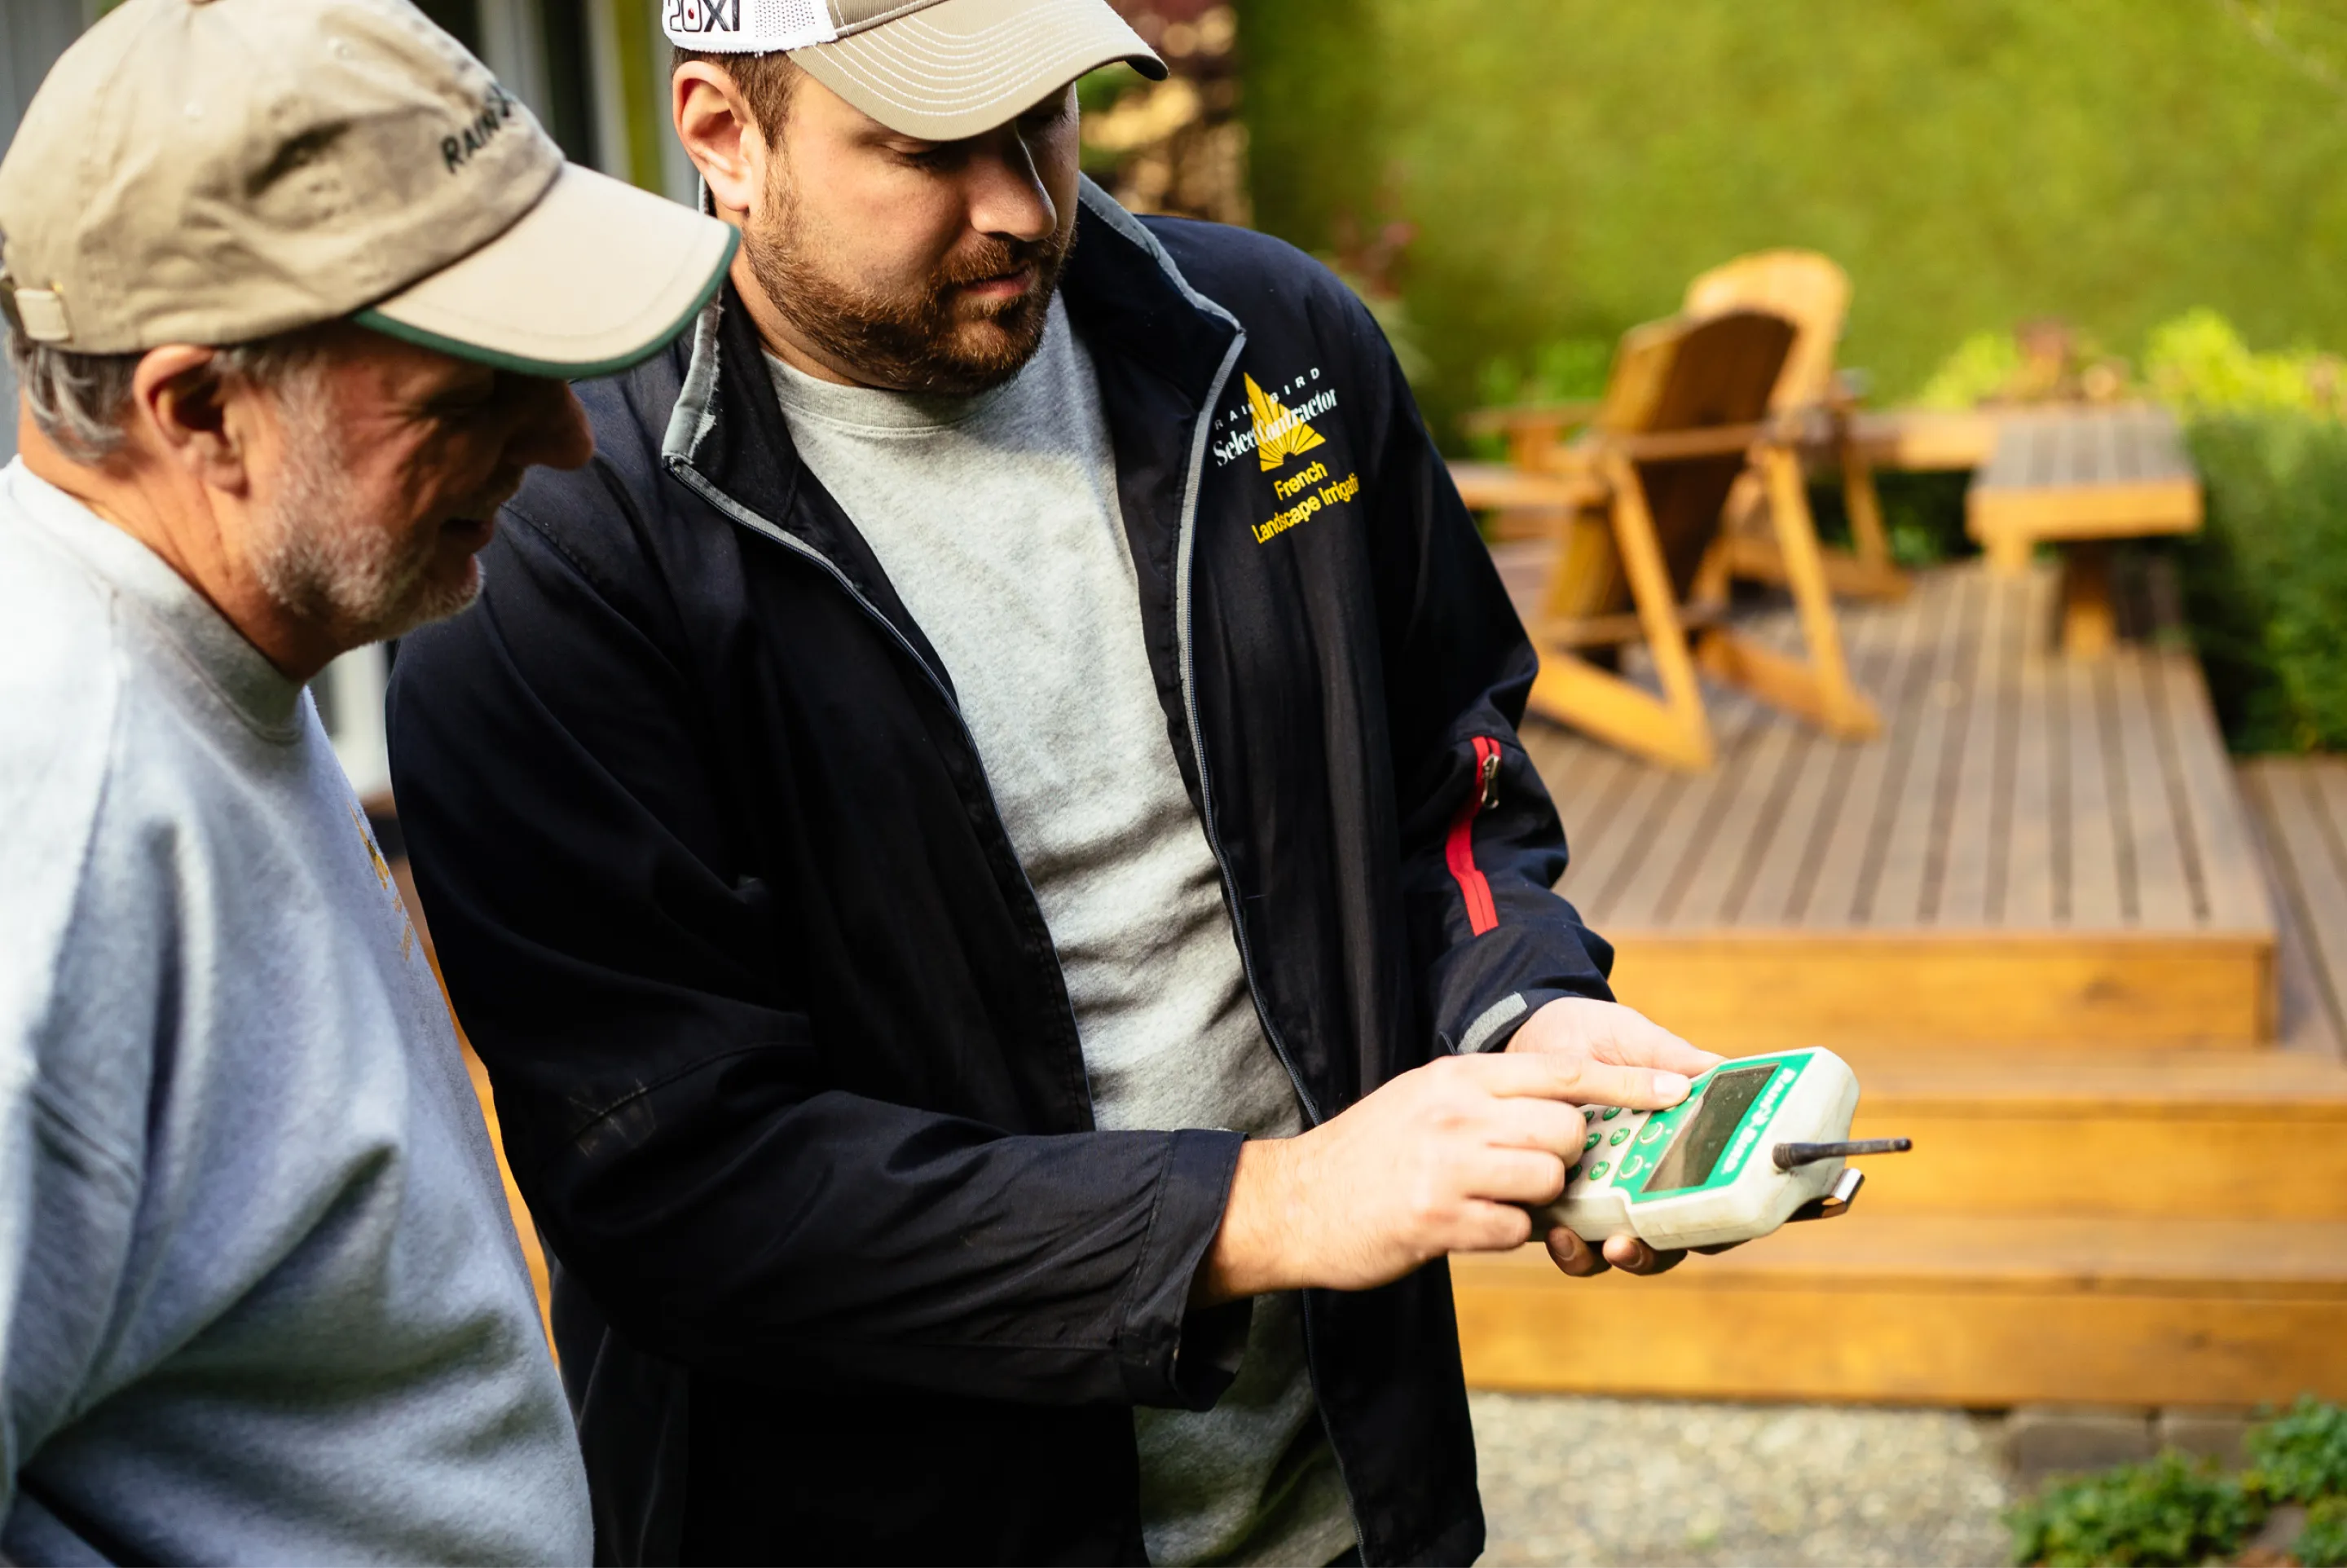 Owners of French Landscape Irrigation showing a device they use on the job